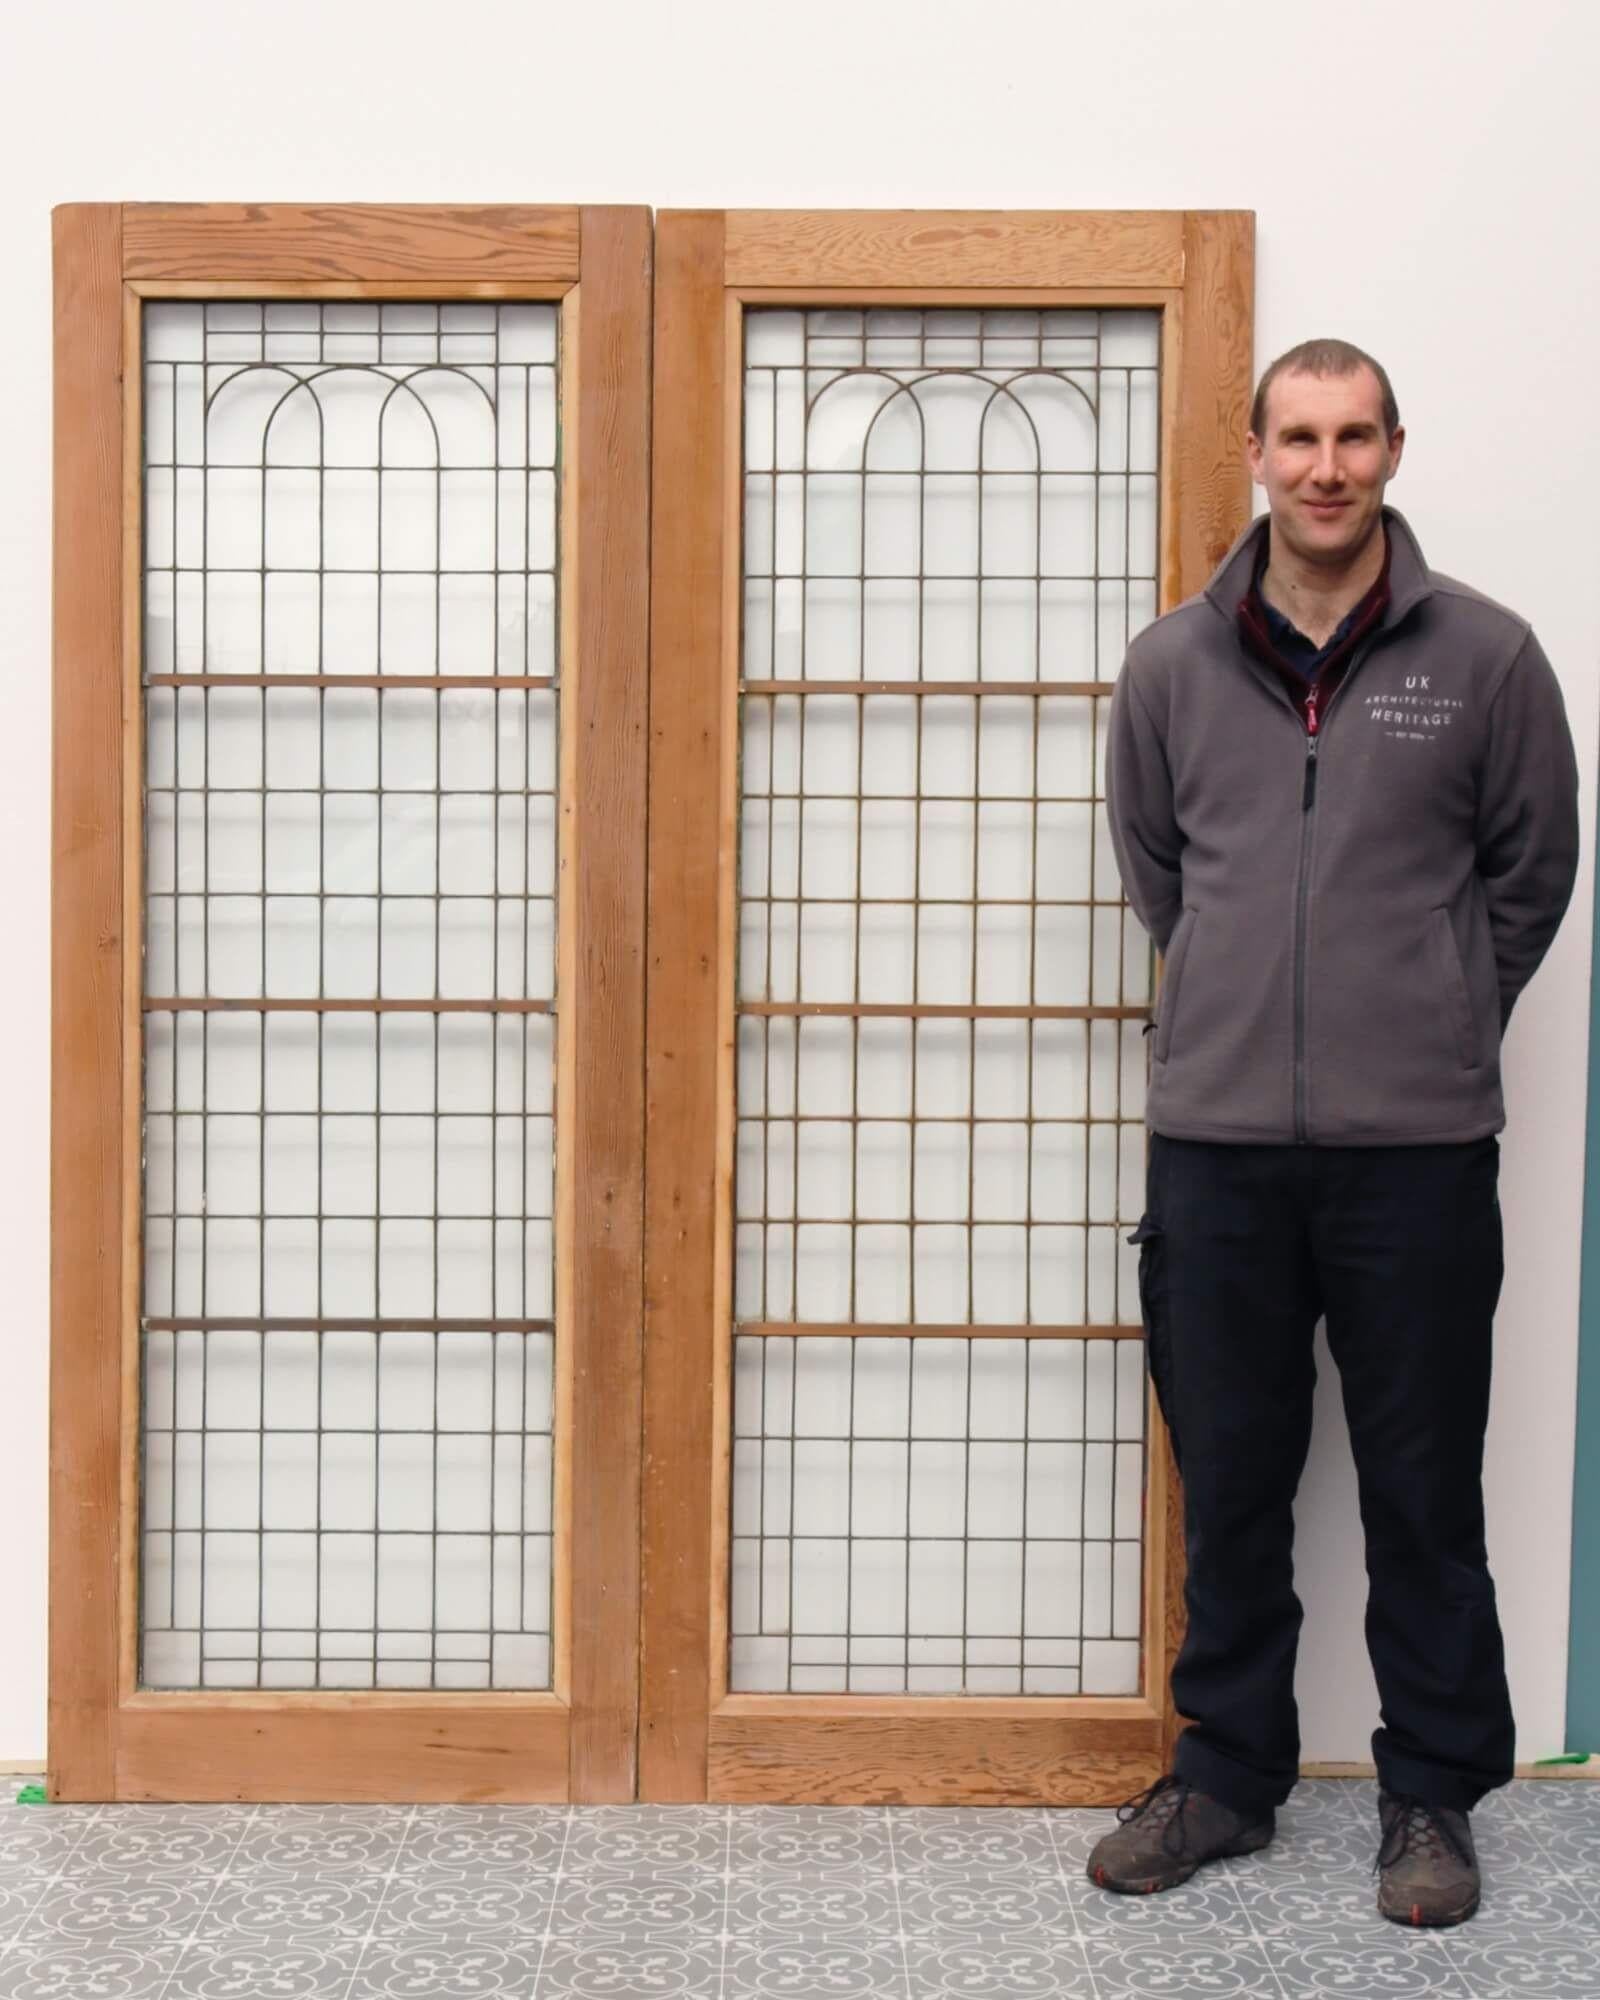 Bring the understated glamour of the Art Deco era to a property with this stylish set of 1920s internal double doors. Each door features full length copperlight glazing within a stripped and sanded pine wood frame with a natural finish. They make a